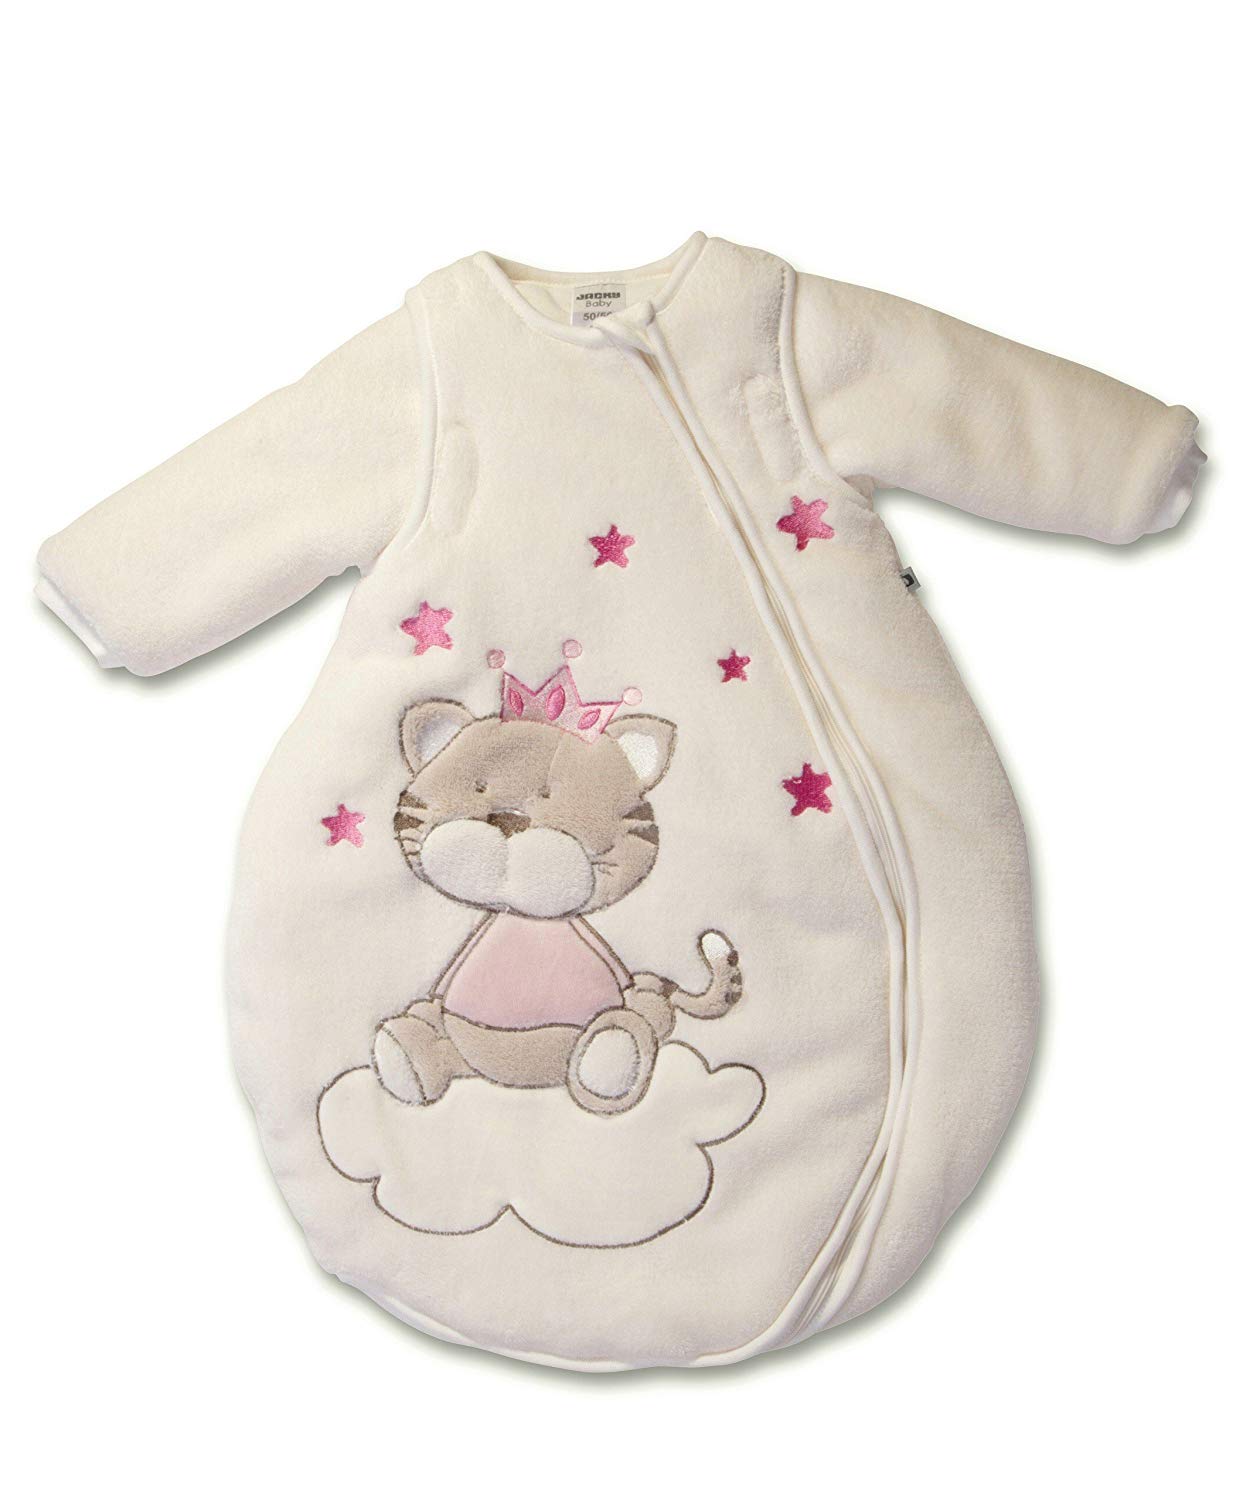 Jacky Girls Winter Sleeping Bag, Pink, Available To Fit Ages 9 - 12 Months